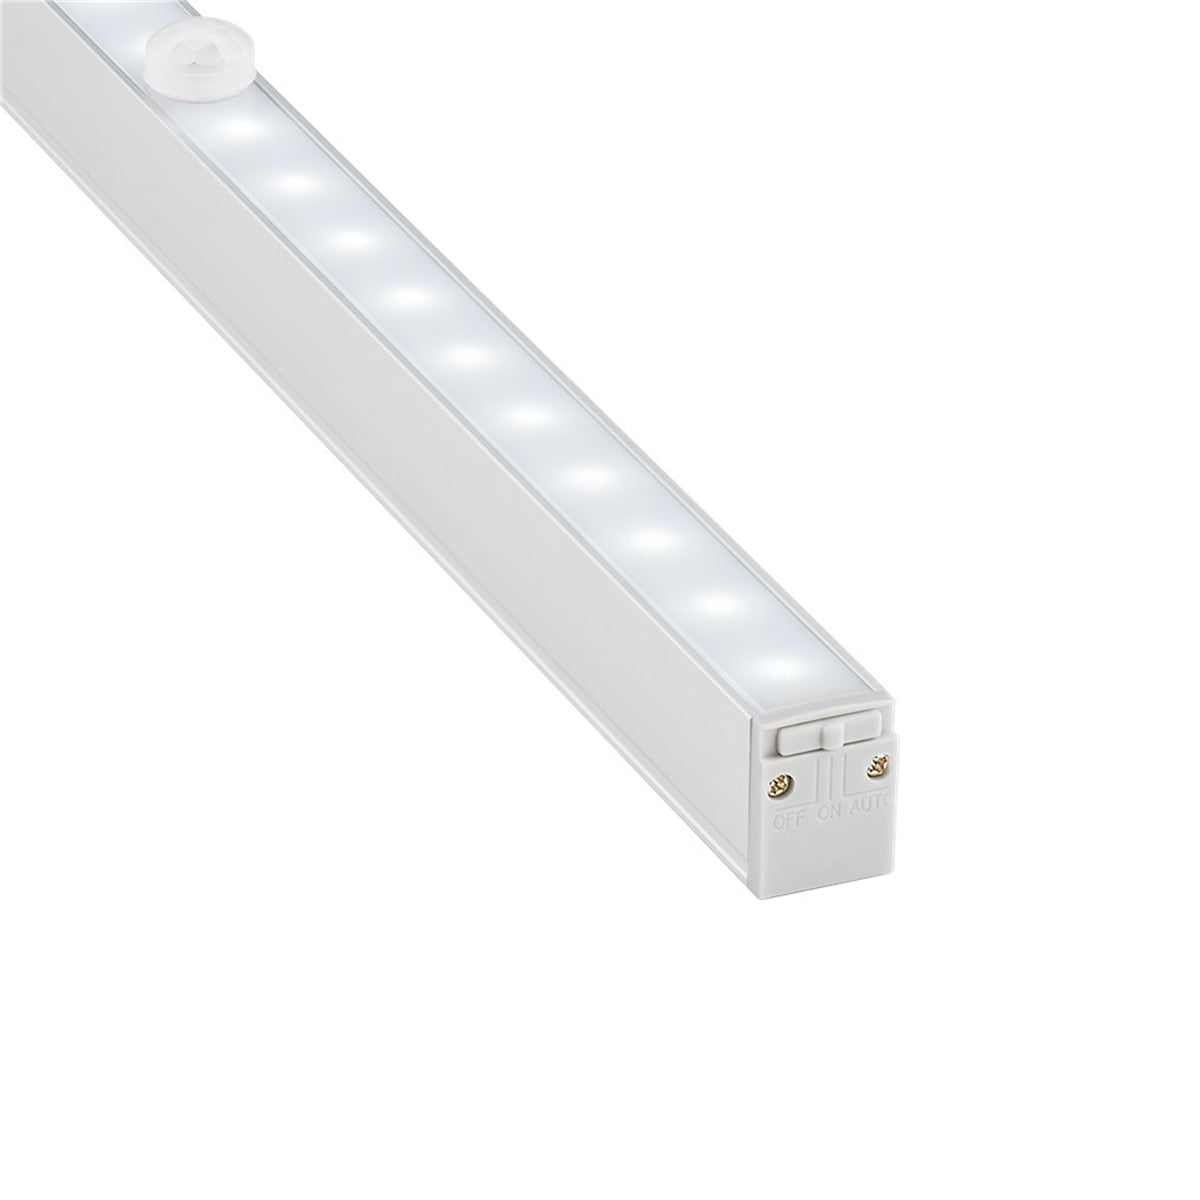 Goobay LED Underfit Lamp with Motion Detector.